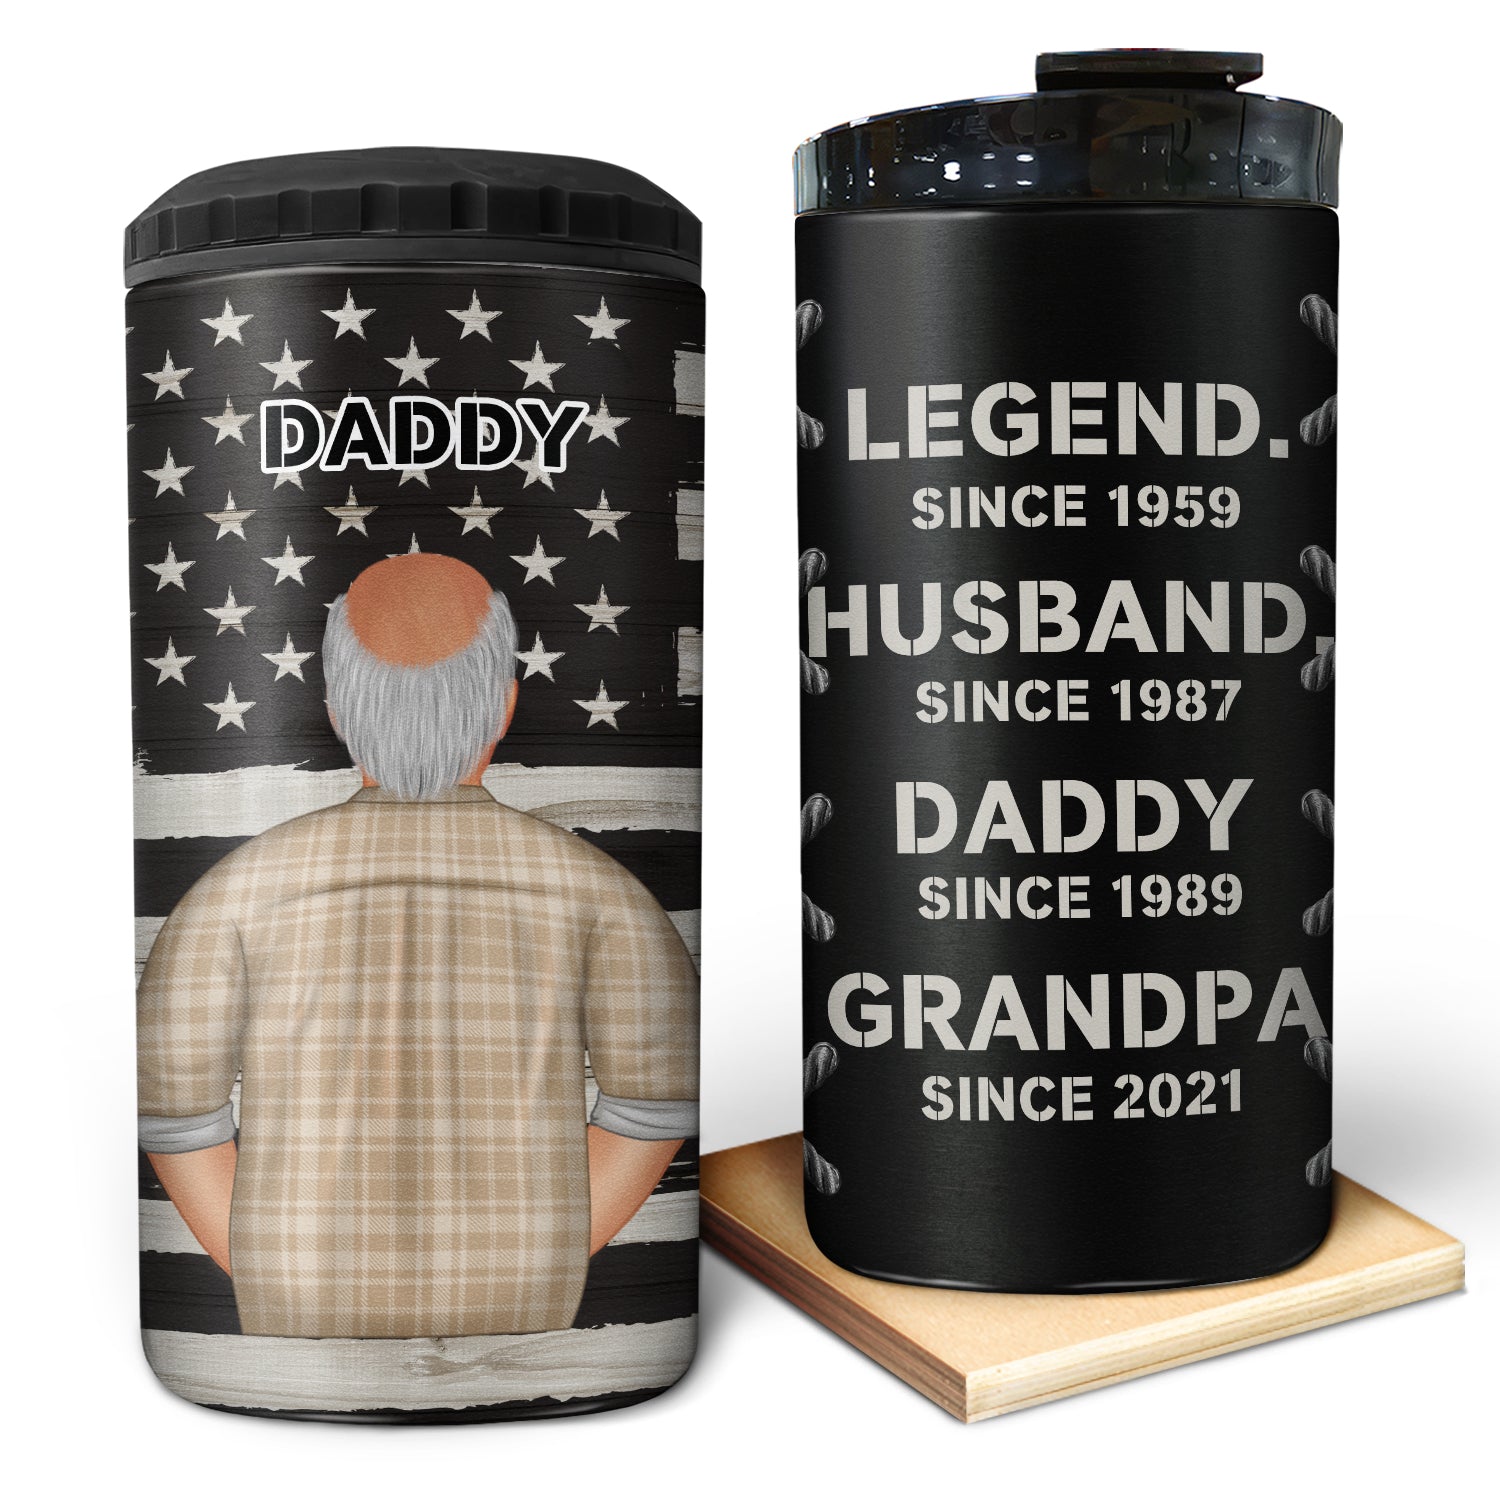 Legend Husband Daddy Grandpa - Gift For Father - Personalized Custom 4 In 1 Can Cooler Tumbler